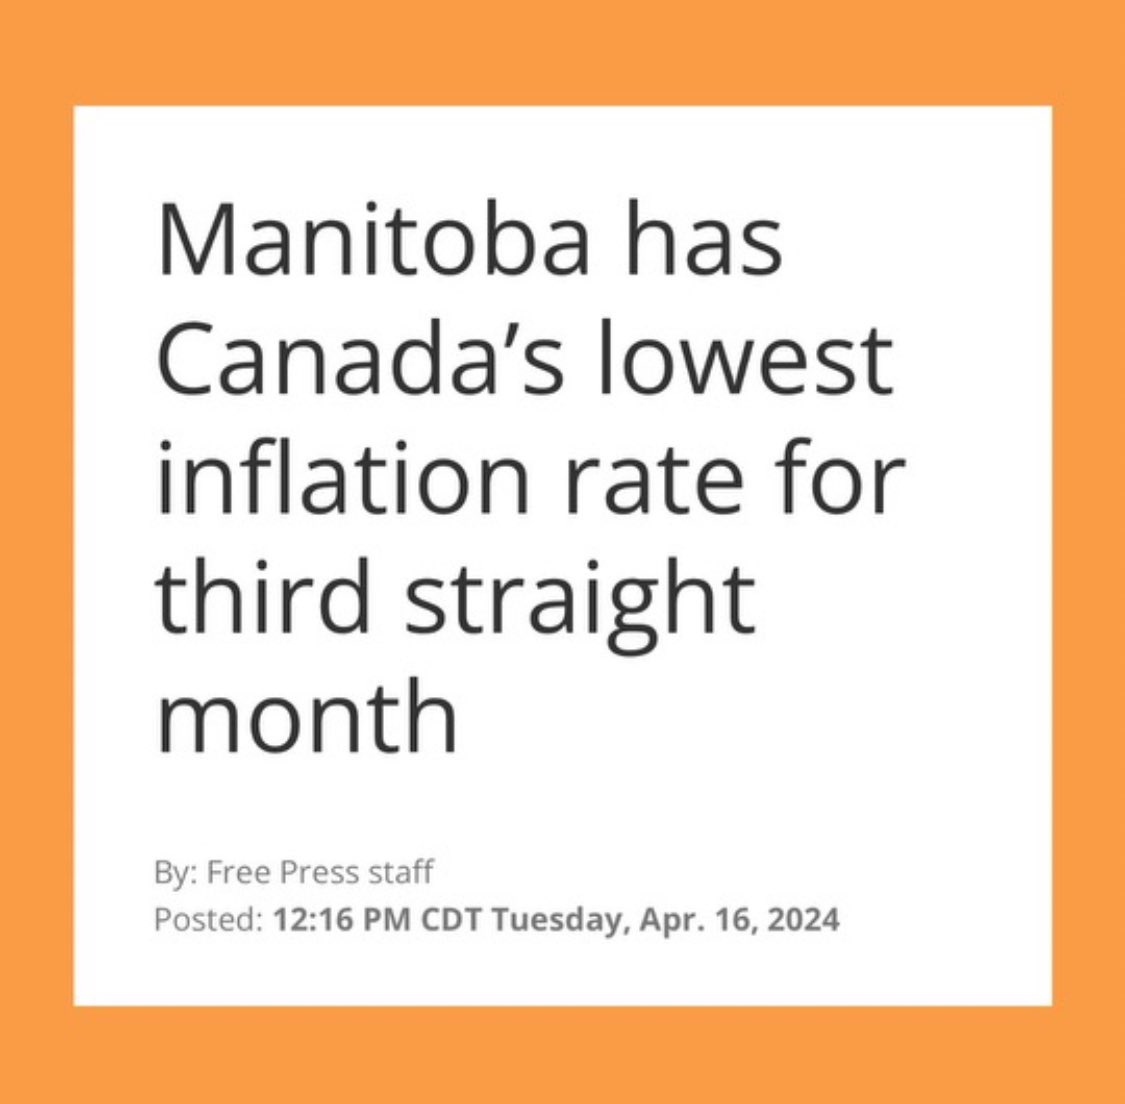 Our gas tax holiday is having a direct impact on inflation rates in MB. For the 3rd month in a row, we have the lowest inflation in the country. This is just one of the many ways our government is working to save you money. #mbpoli